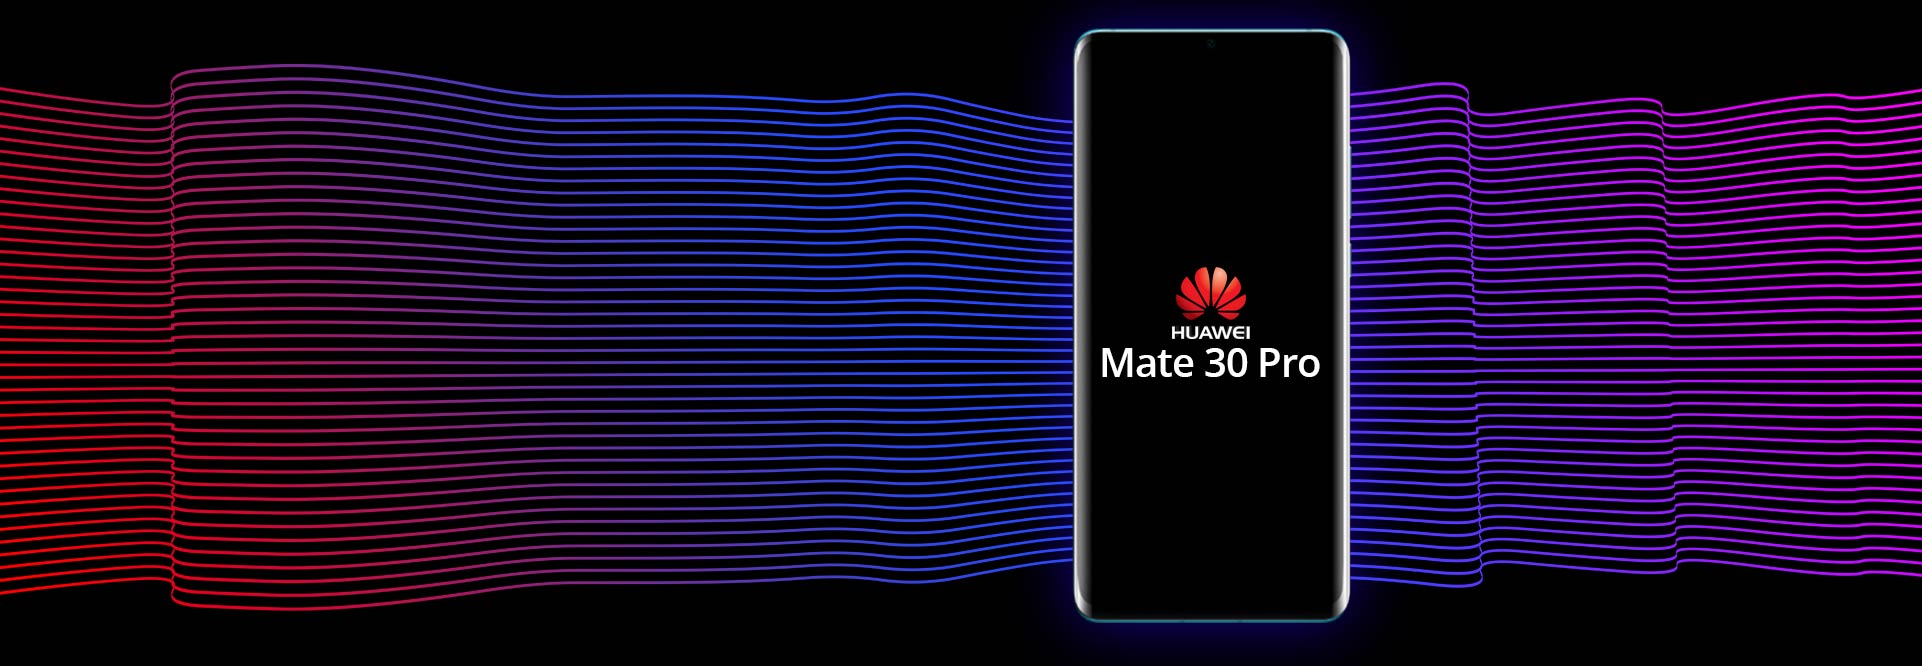 Huawei Mate 30 Pro – Rumours, Specs and Release Date